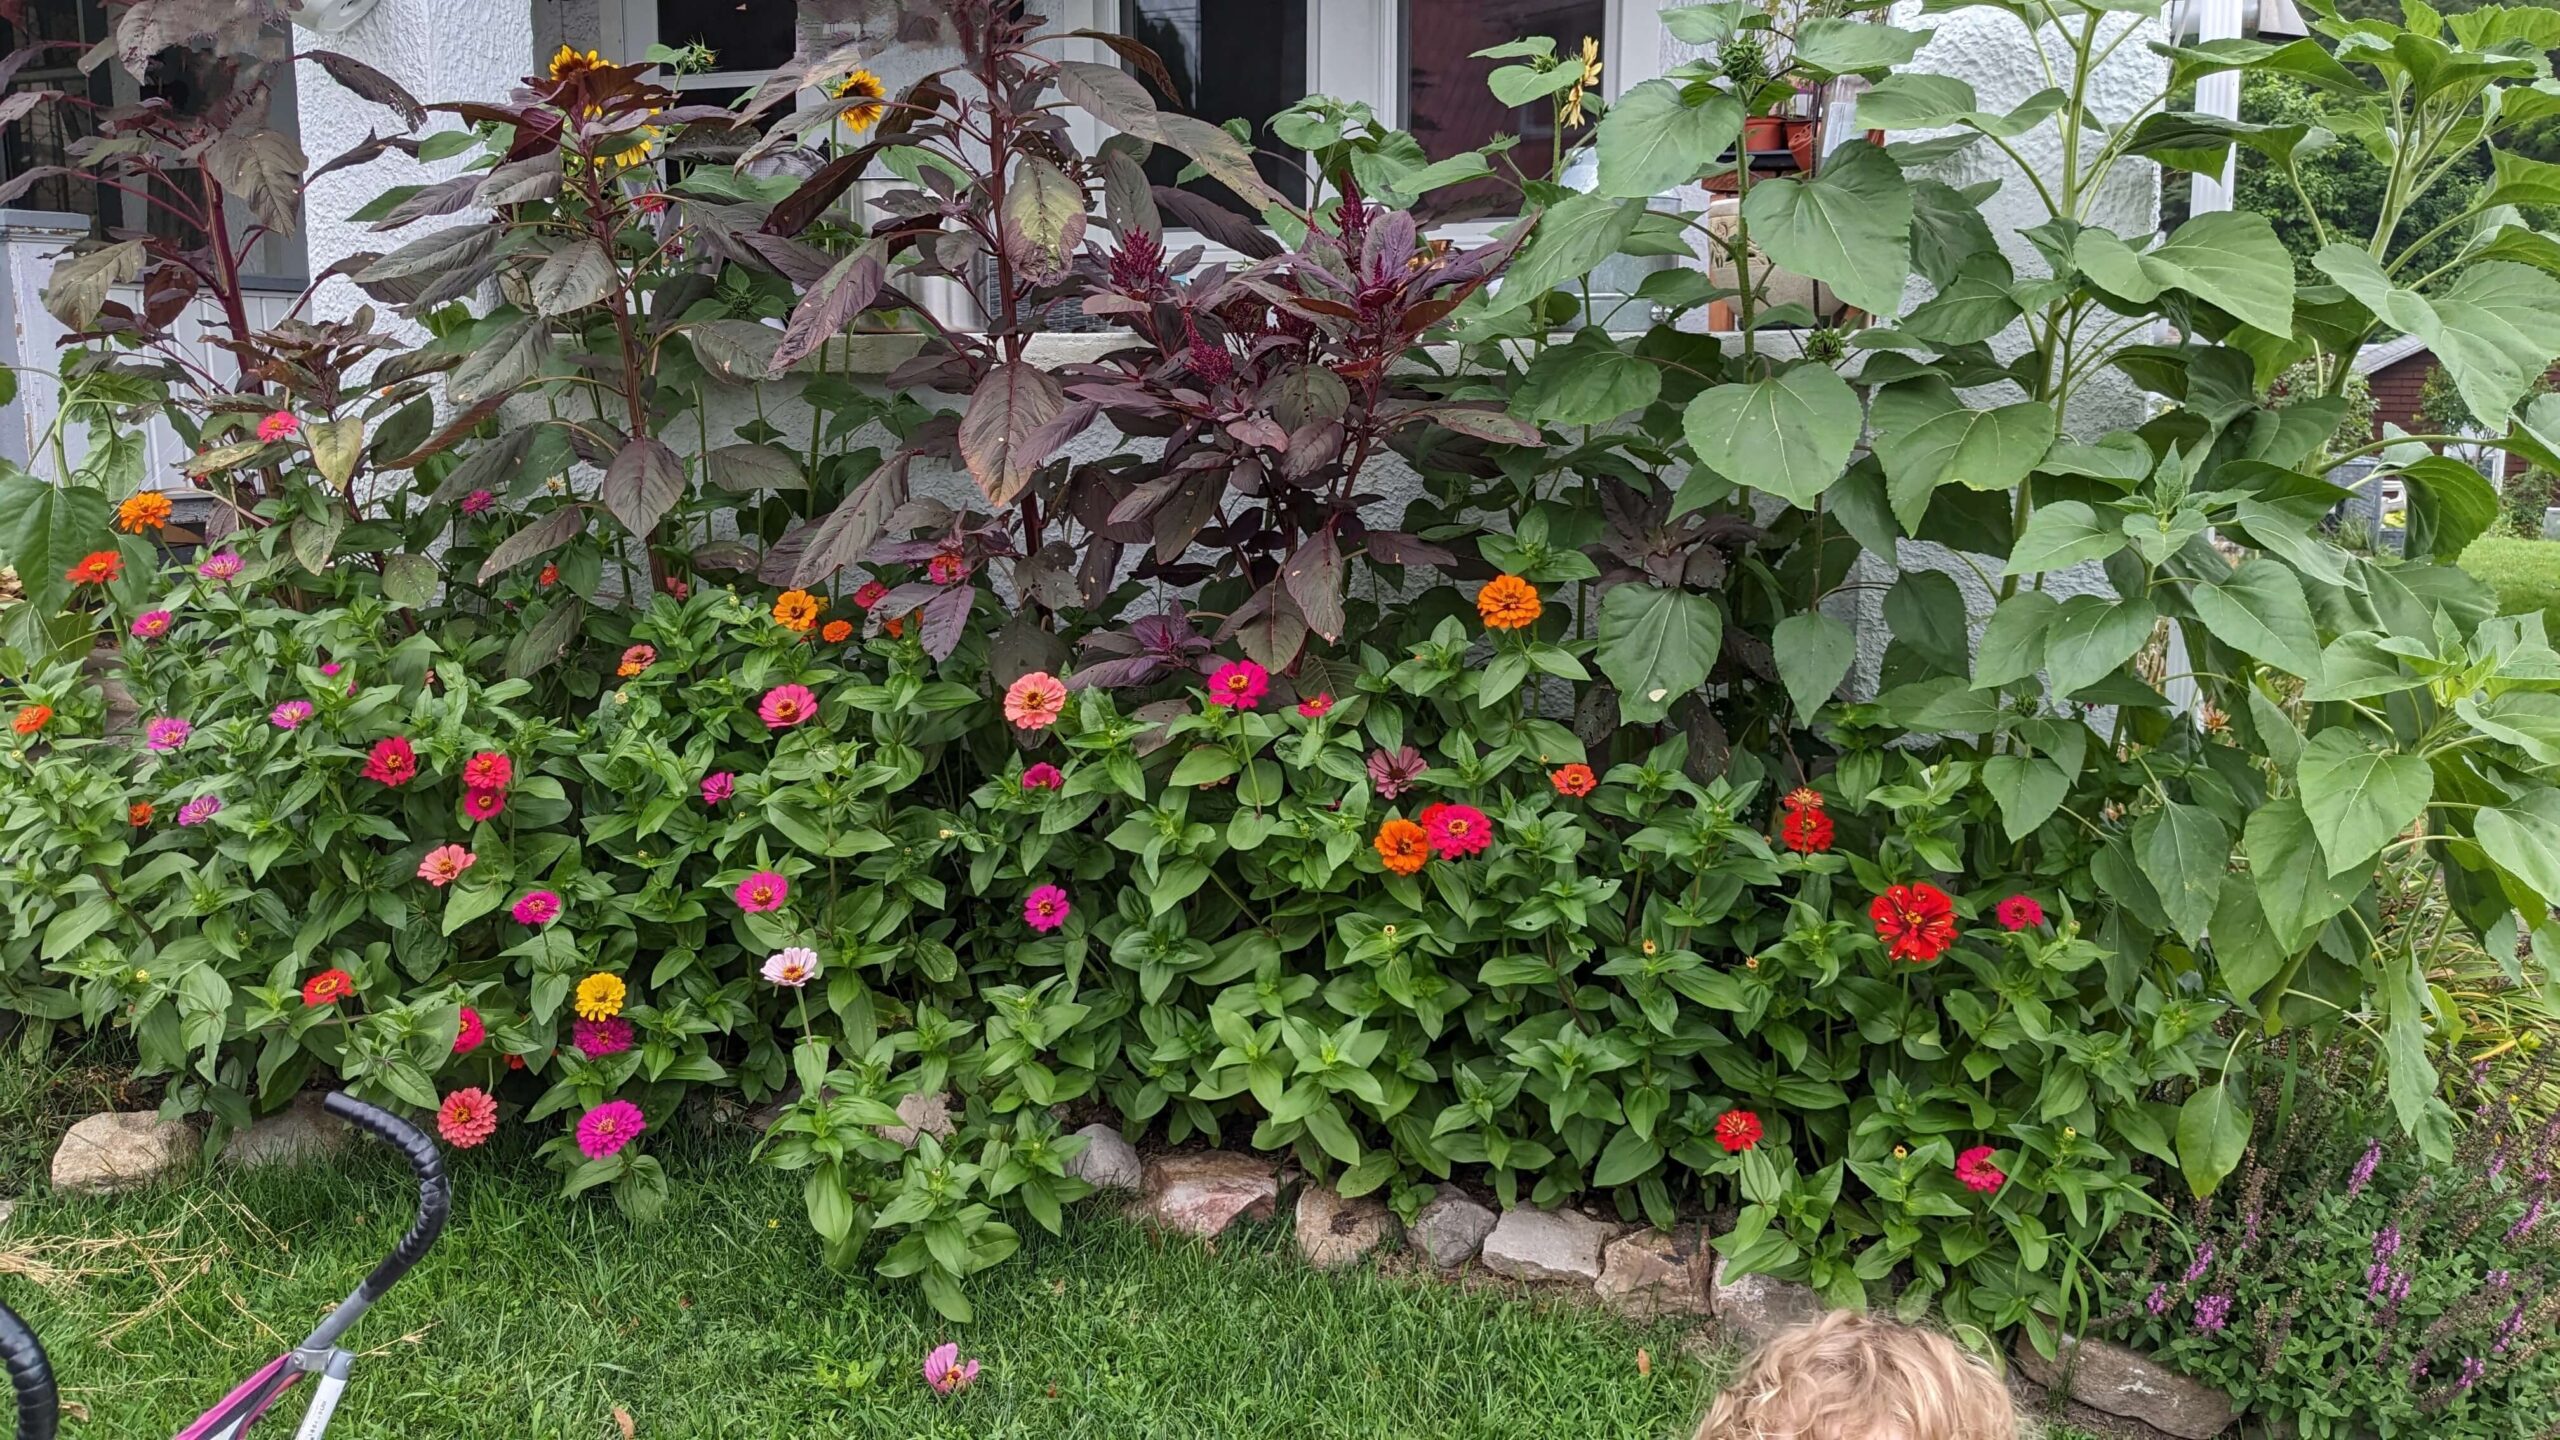 a rock lined garden bed against a house with zinnia flowers, giant purple amaranth plants, and several varieties of sunflowers